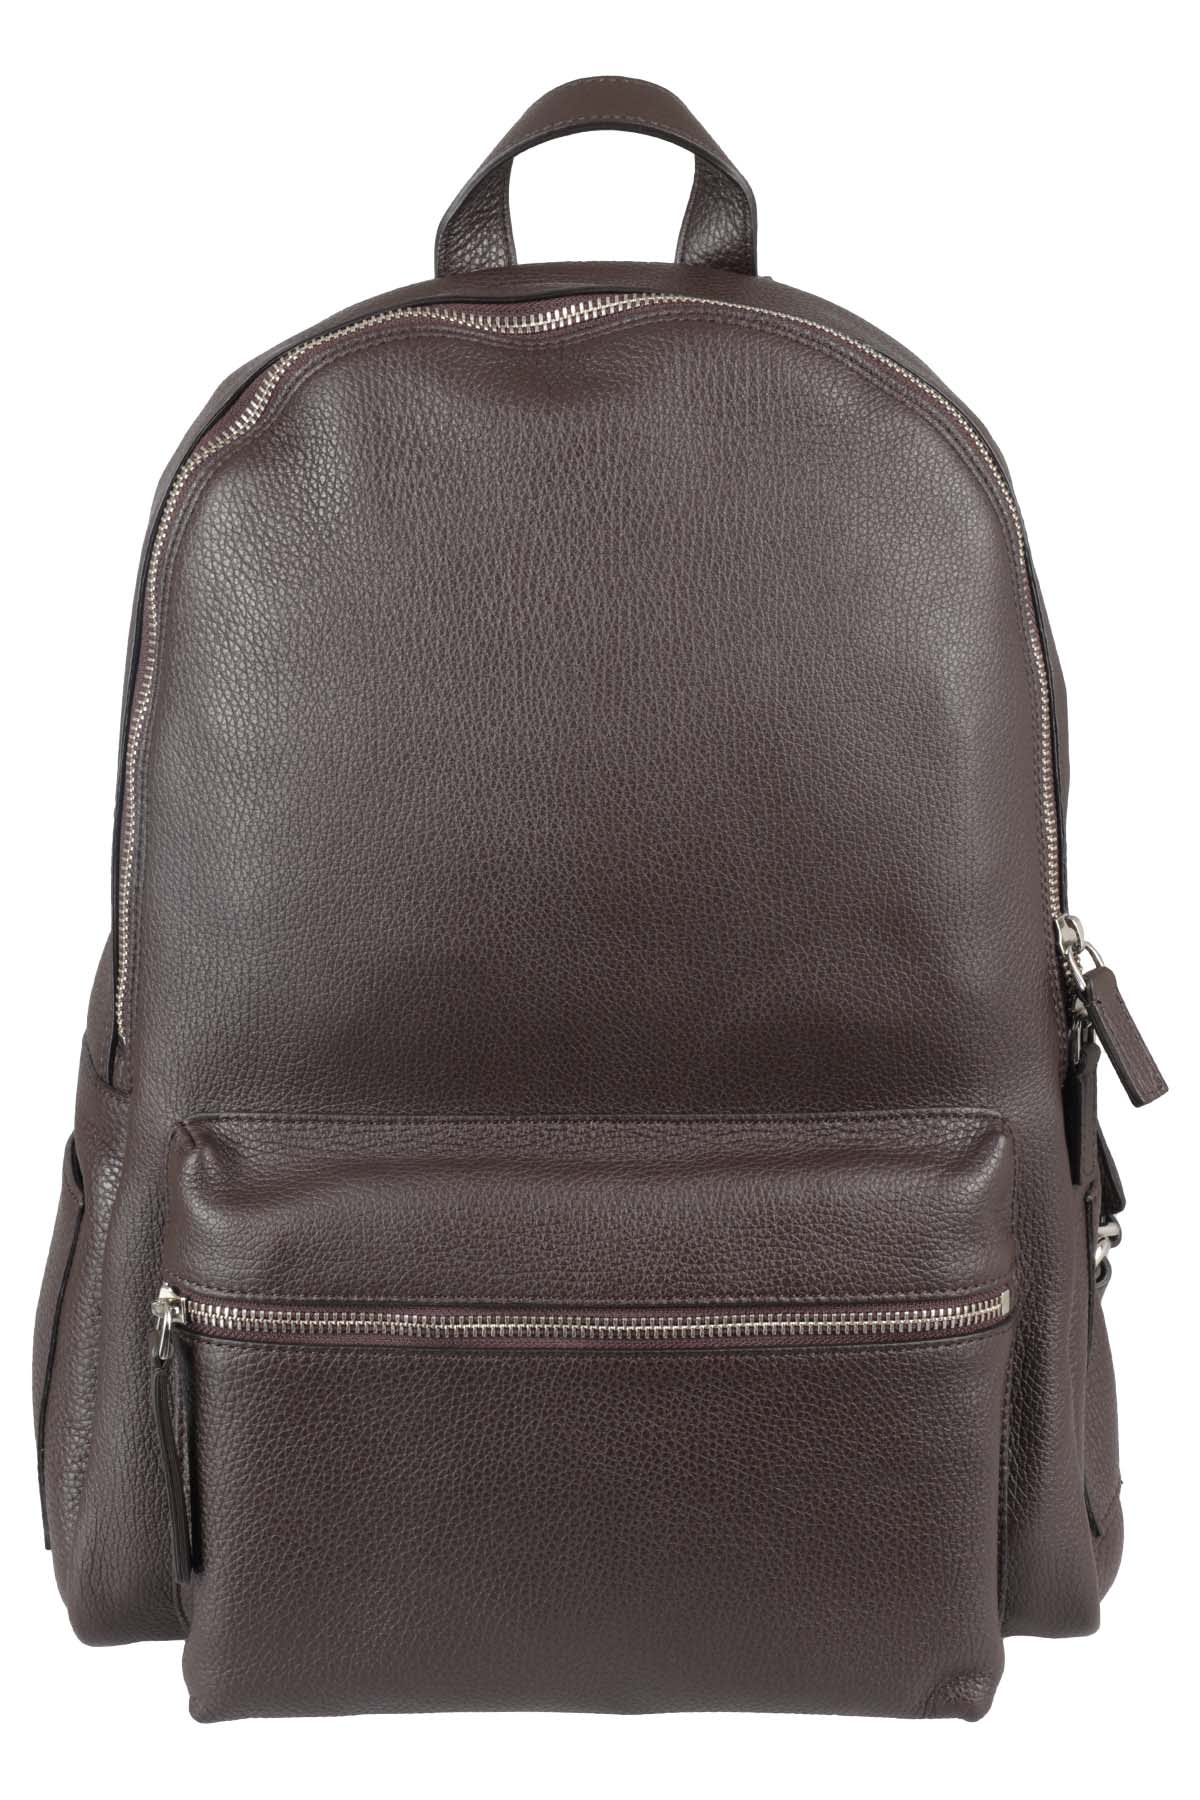 ORCIANI LEATHER BACKPACK